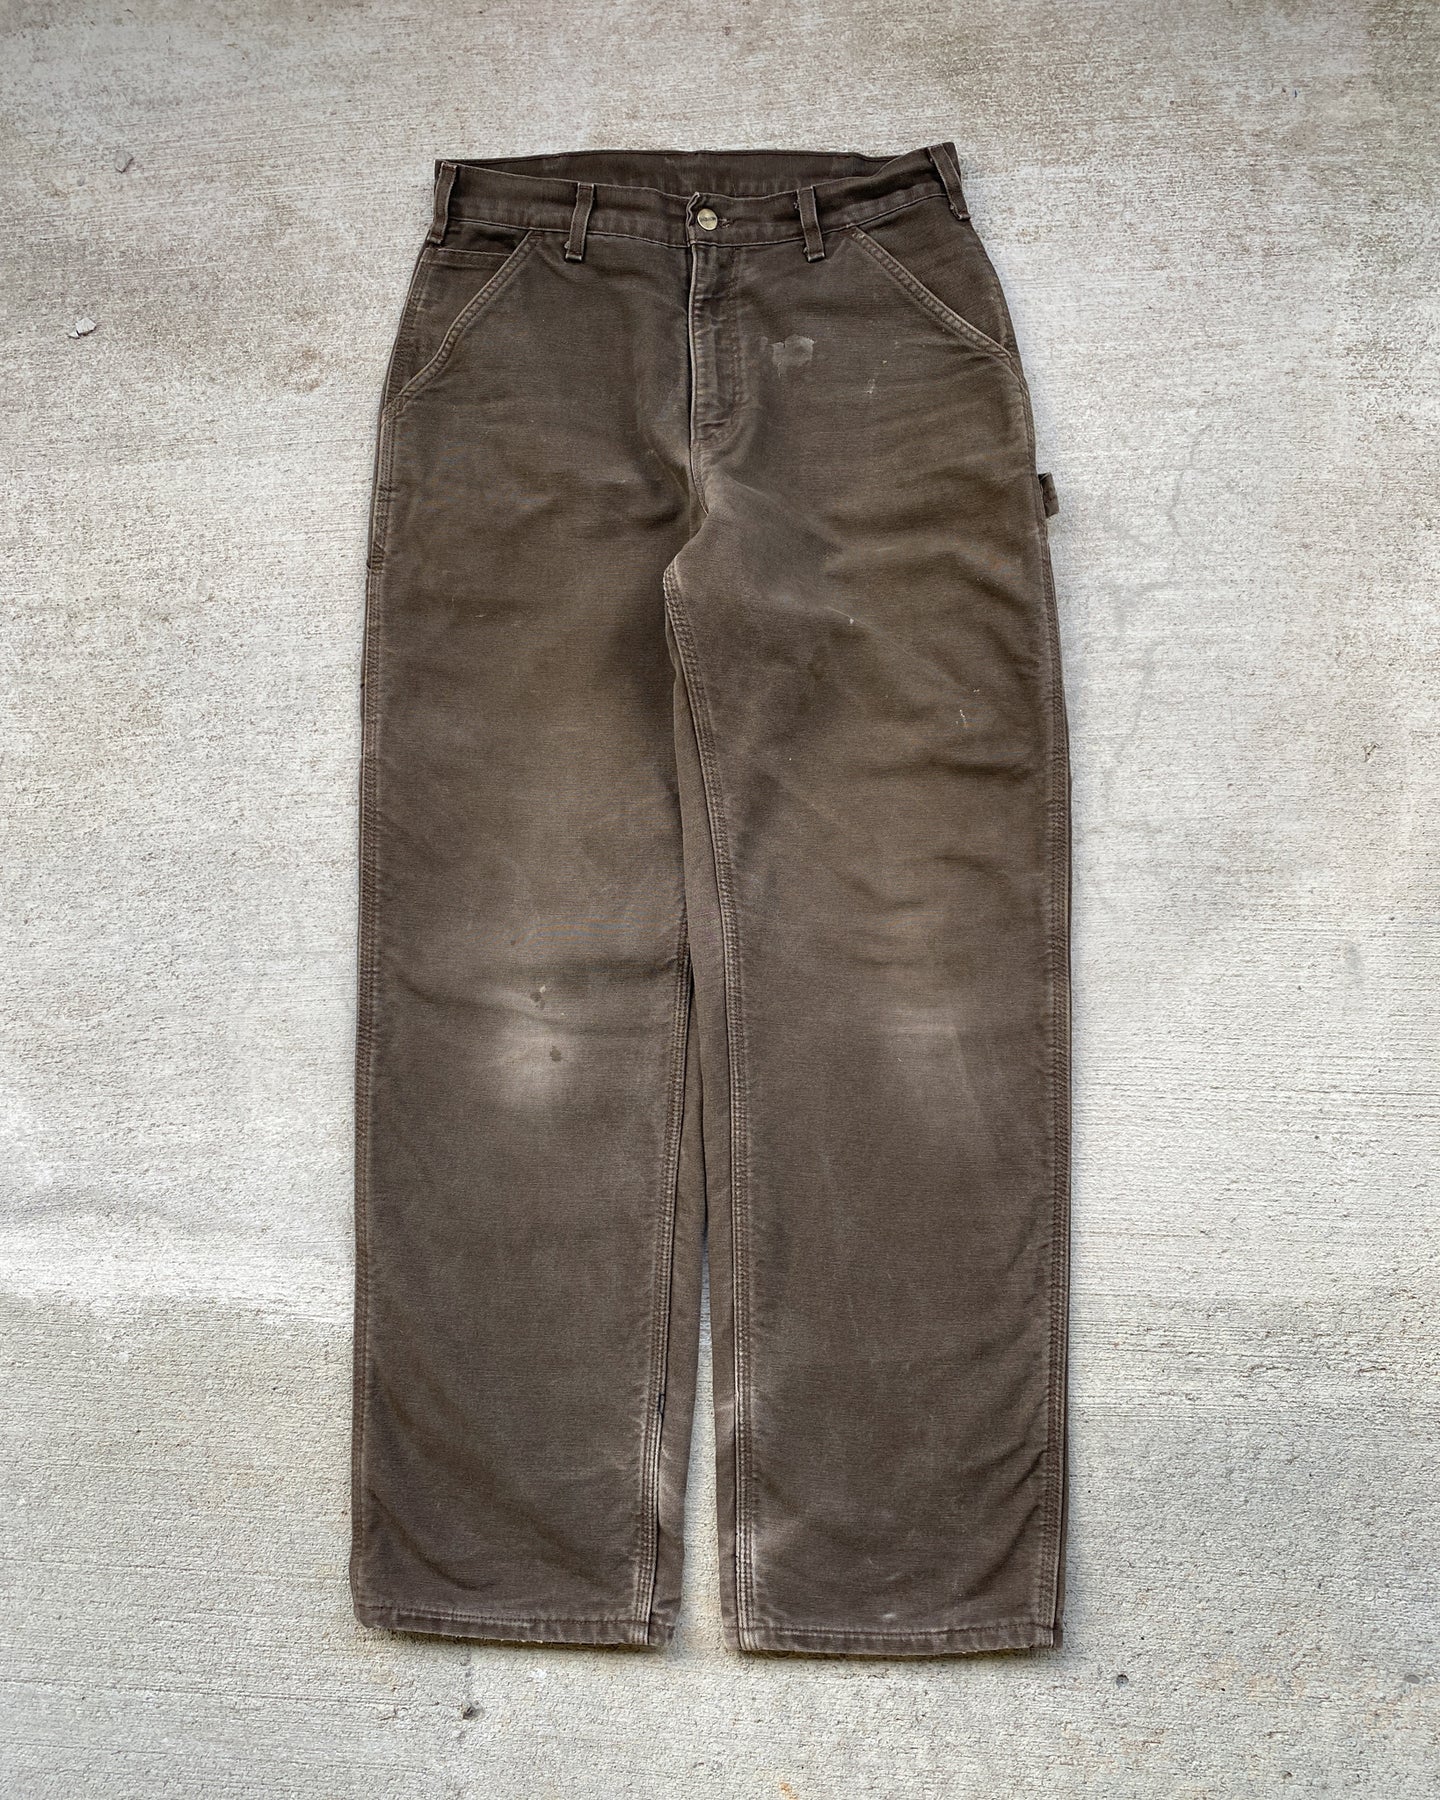 1990s Carhartt Flannel Lined Carpenter Work Pants - Size 32 x 32